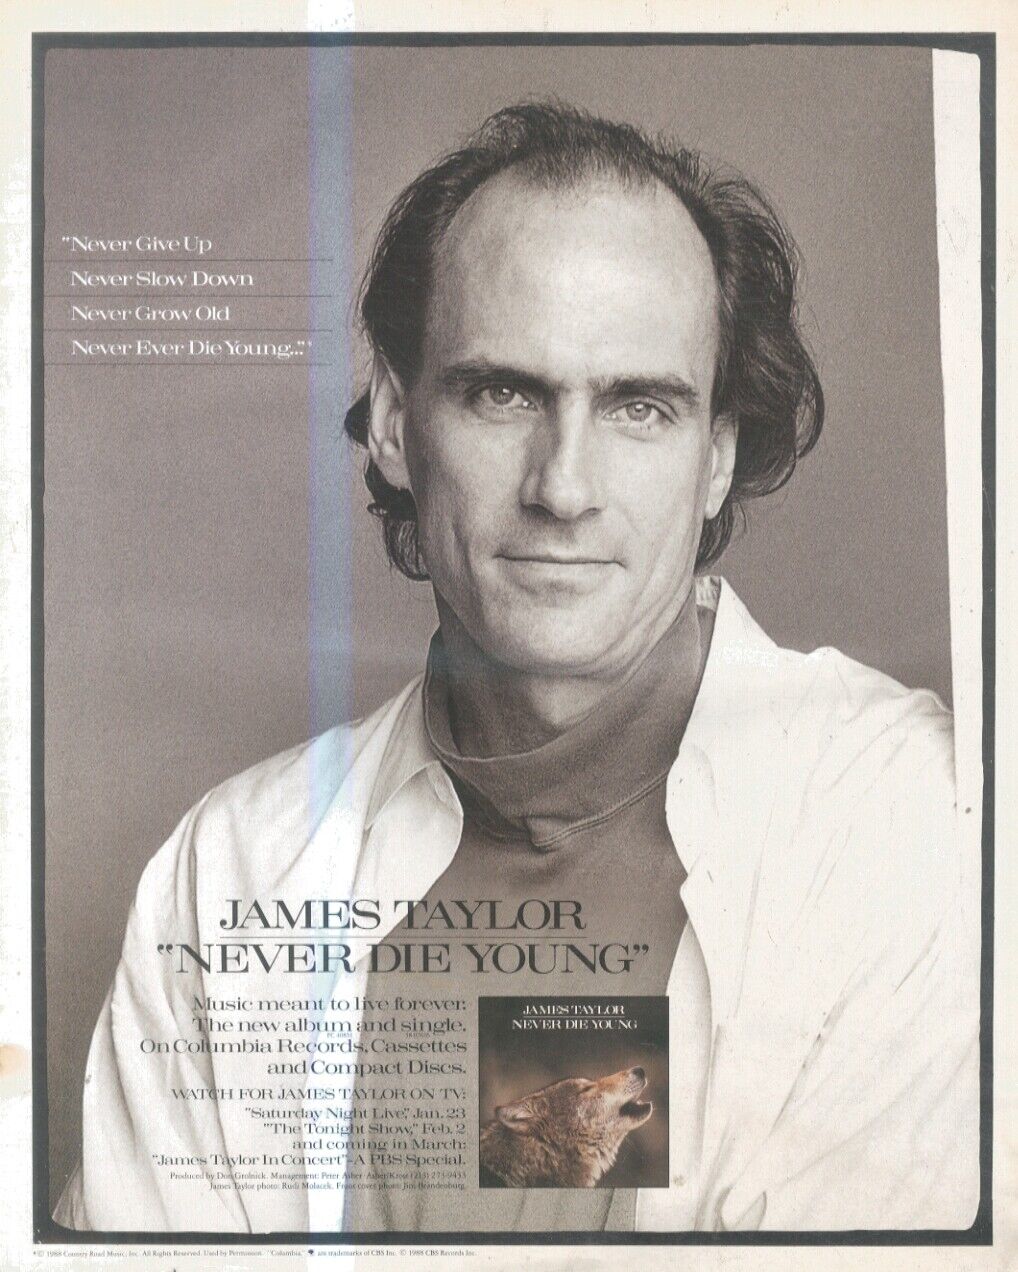 SFBK22 PICTURE/ADVERT 13x11 JAMES TAYLOR : NEVER DIE YOUNG